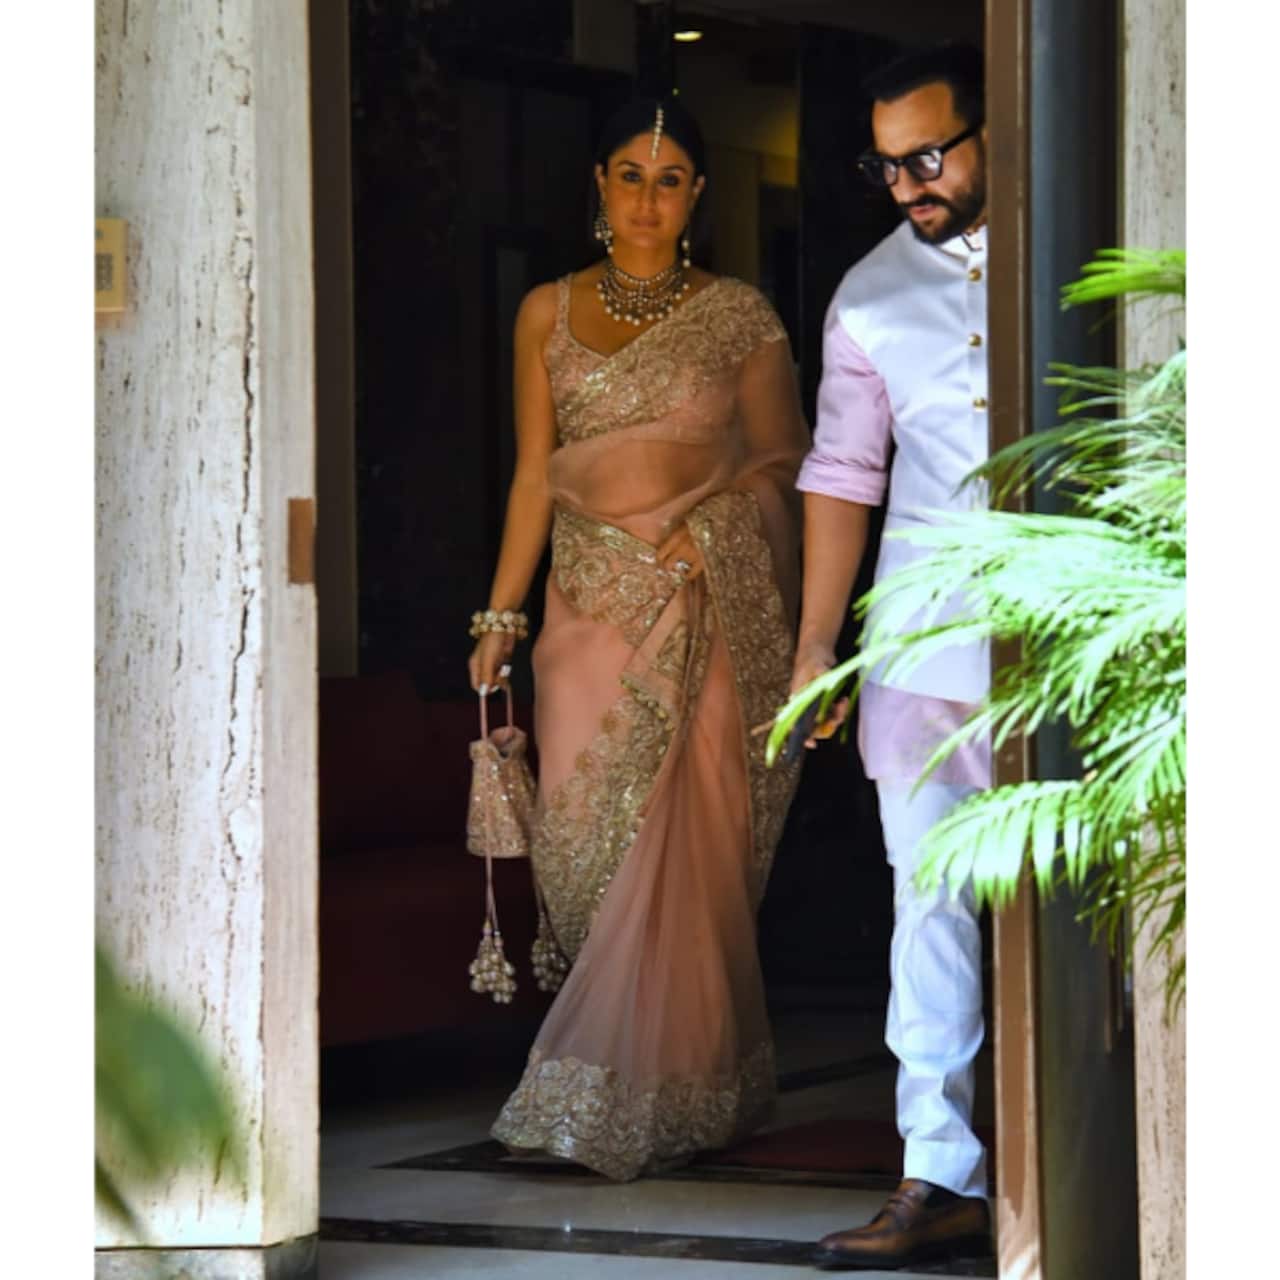 Mr and Mrs Khan head to the wedding